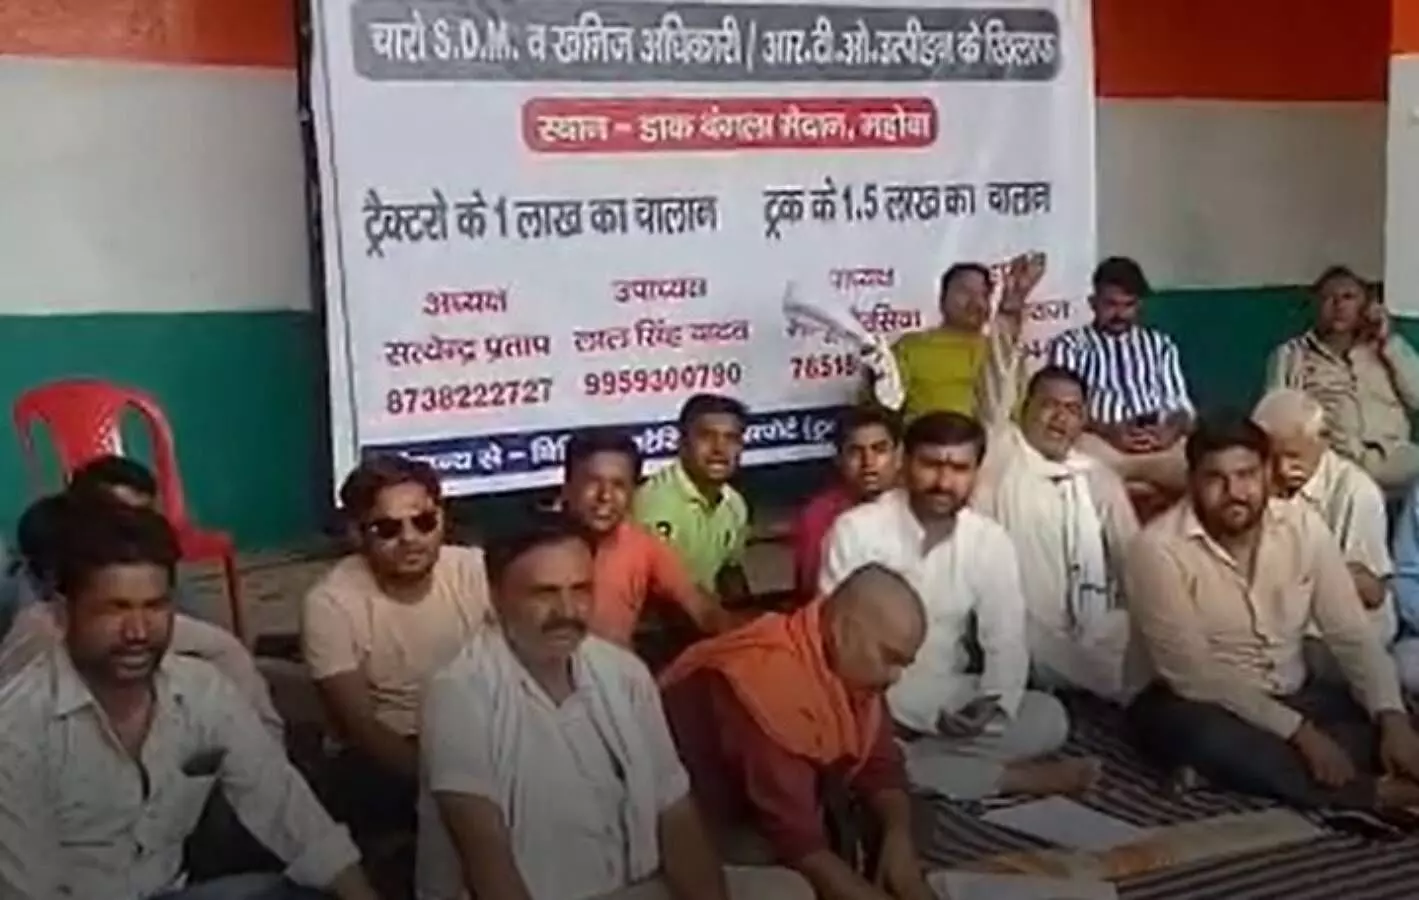 Truck operators sit on protest against challan being done wrong by the administration